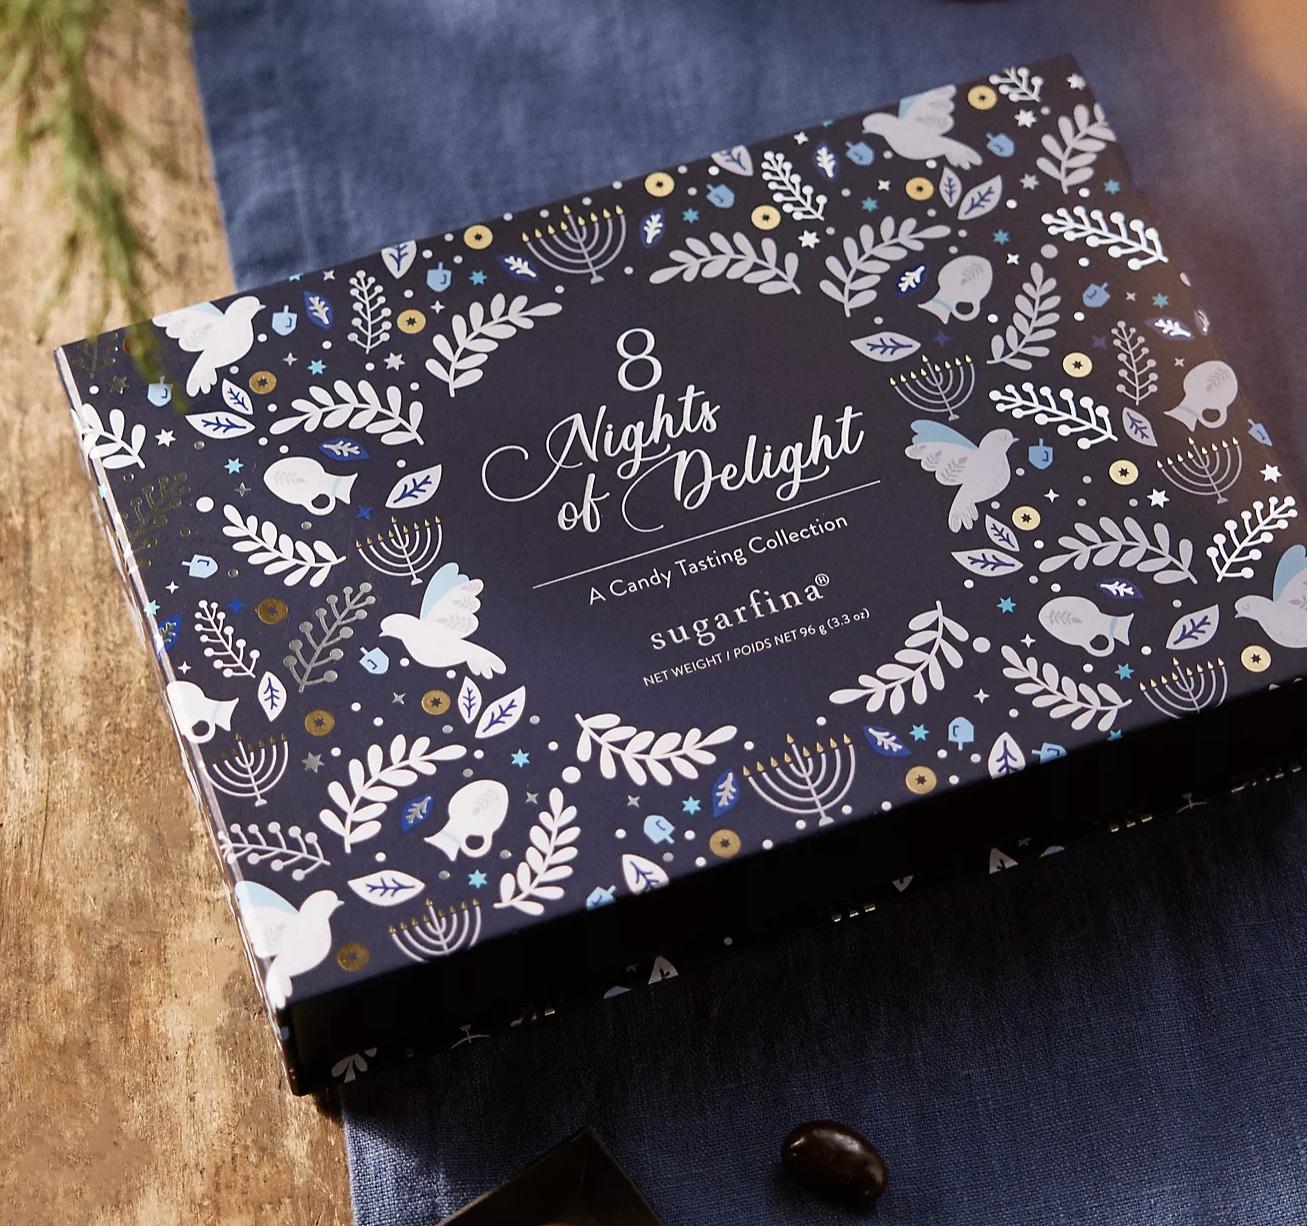 Read more about the article Sugarfina 8 Nights of Delight Candy Advent Calendar